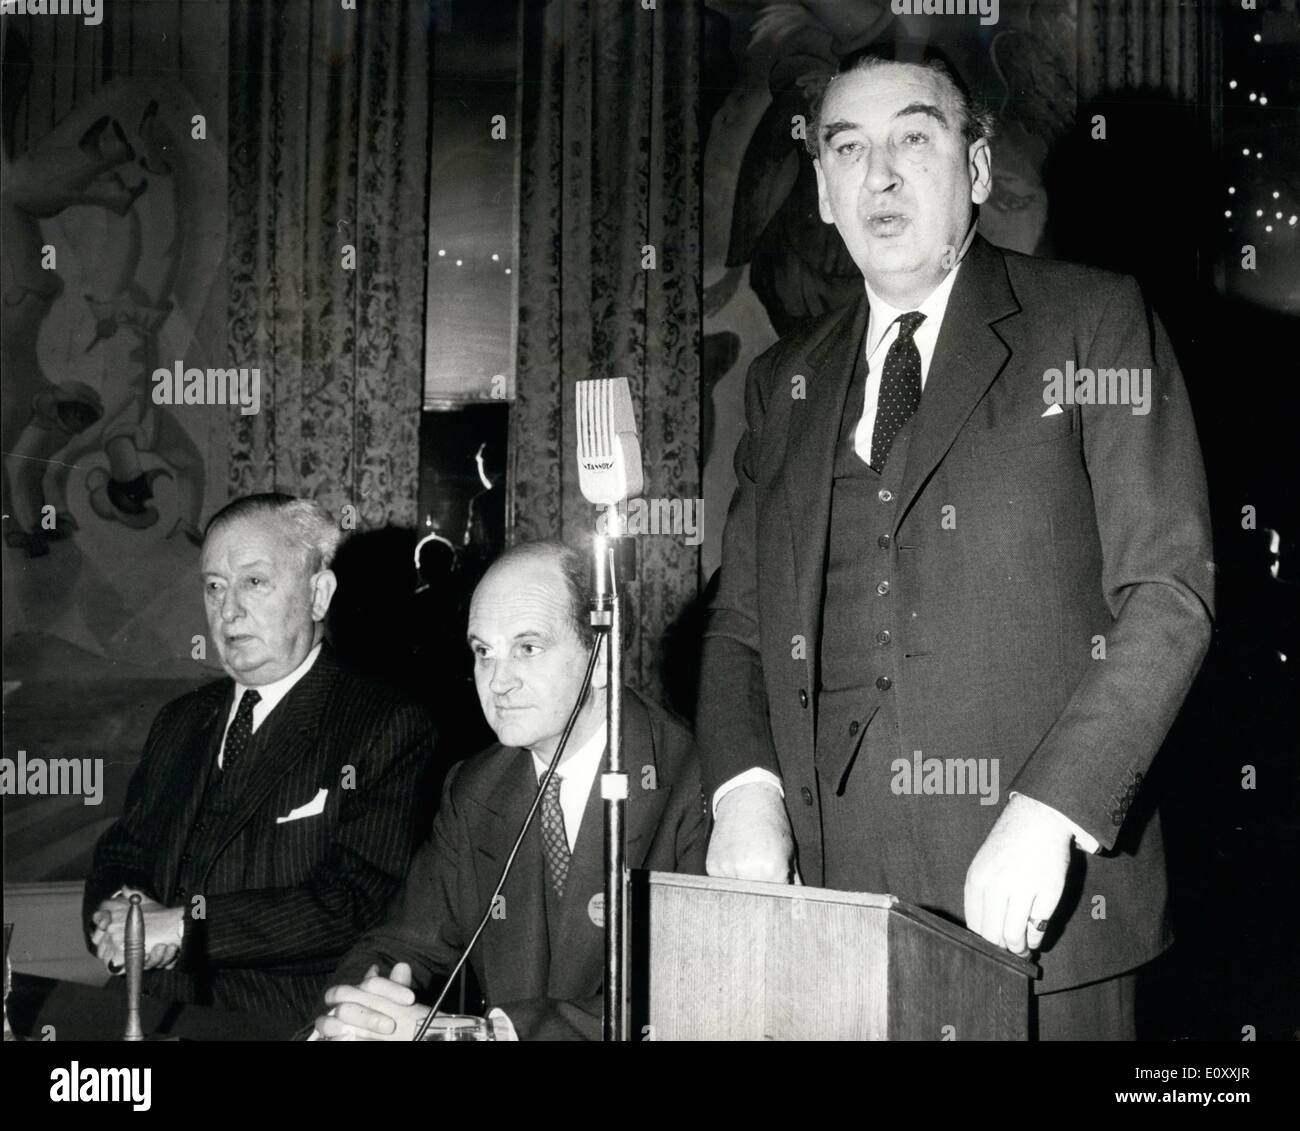 Jan. 01, 1968 - Sterling - European Monetary Co-Operation and World Monetary Reform Conference Sterling - European Monetary Co-Operation and world Monetary Reform - was opened today at the Cafe Royal, W.L., by the Earl of Cromer, M.B.E Photo shows the Earl of cromer making his opening speech today. Looking on are (left), Pierre Dieterlen, Director of Research, Center National de la Recherche Scientific, Paris, and (center) is the conference chairman, B.D. Barton, F.C. Chairman, Executive Committee Federal Trust. Stock Photo